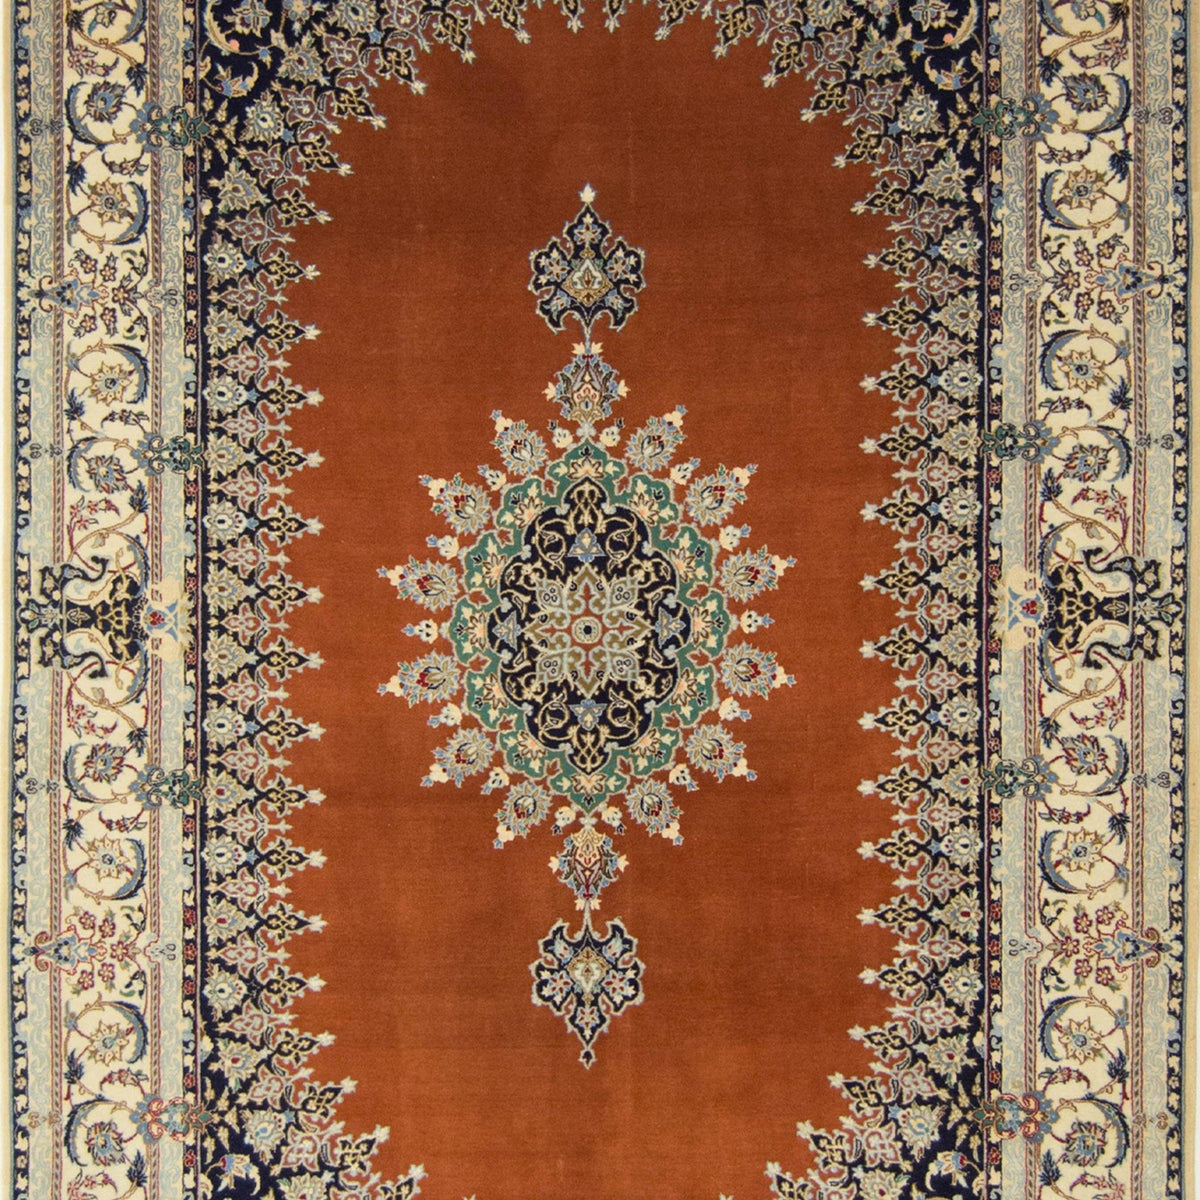 Authentic Fine Persian Hand-knotted Wool &amp; Silk 3 LAA Nain Rug ( SIGNED HABIBIYAN )